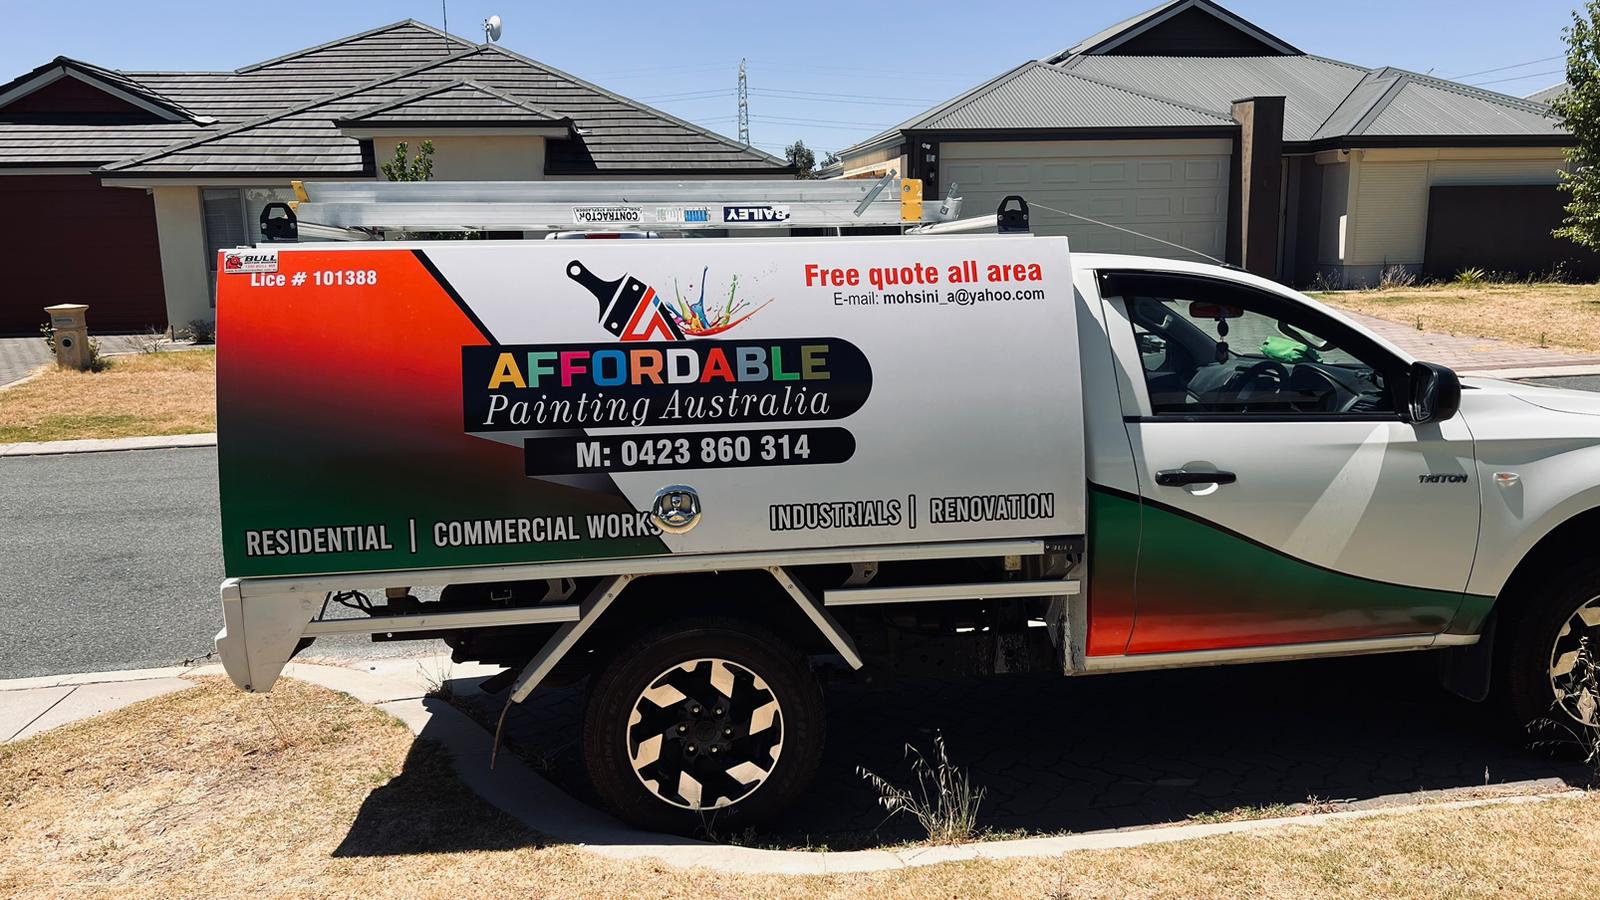 Painters in Perth | Affordable Painting Australia